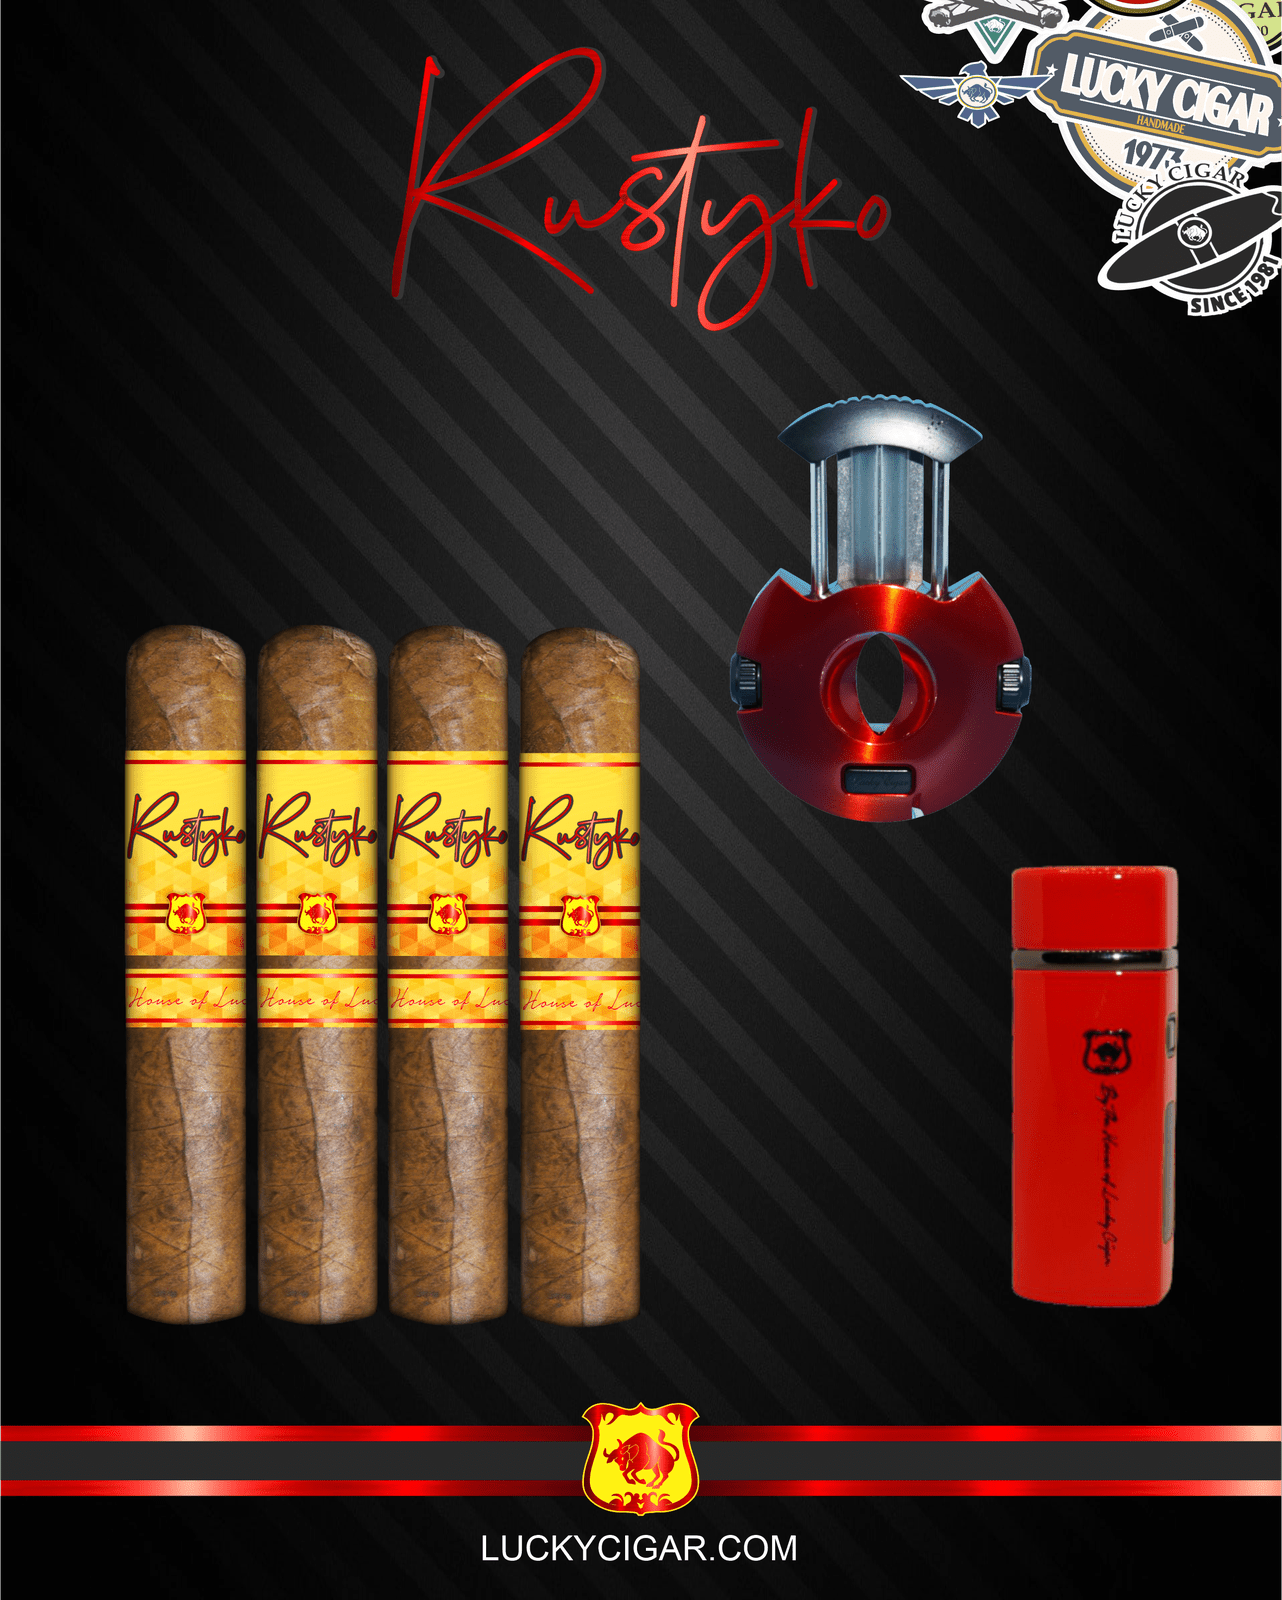 Infused Cigars: Rustyko Robusto 5x54 Cigars - Set of 4 with Red Torch, Round Cutter